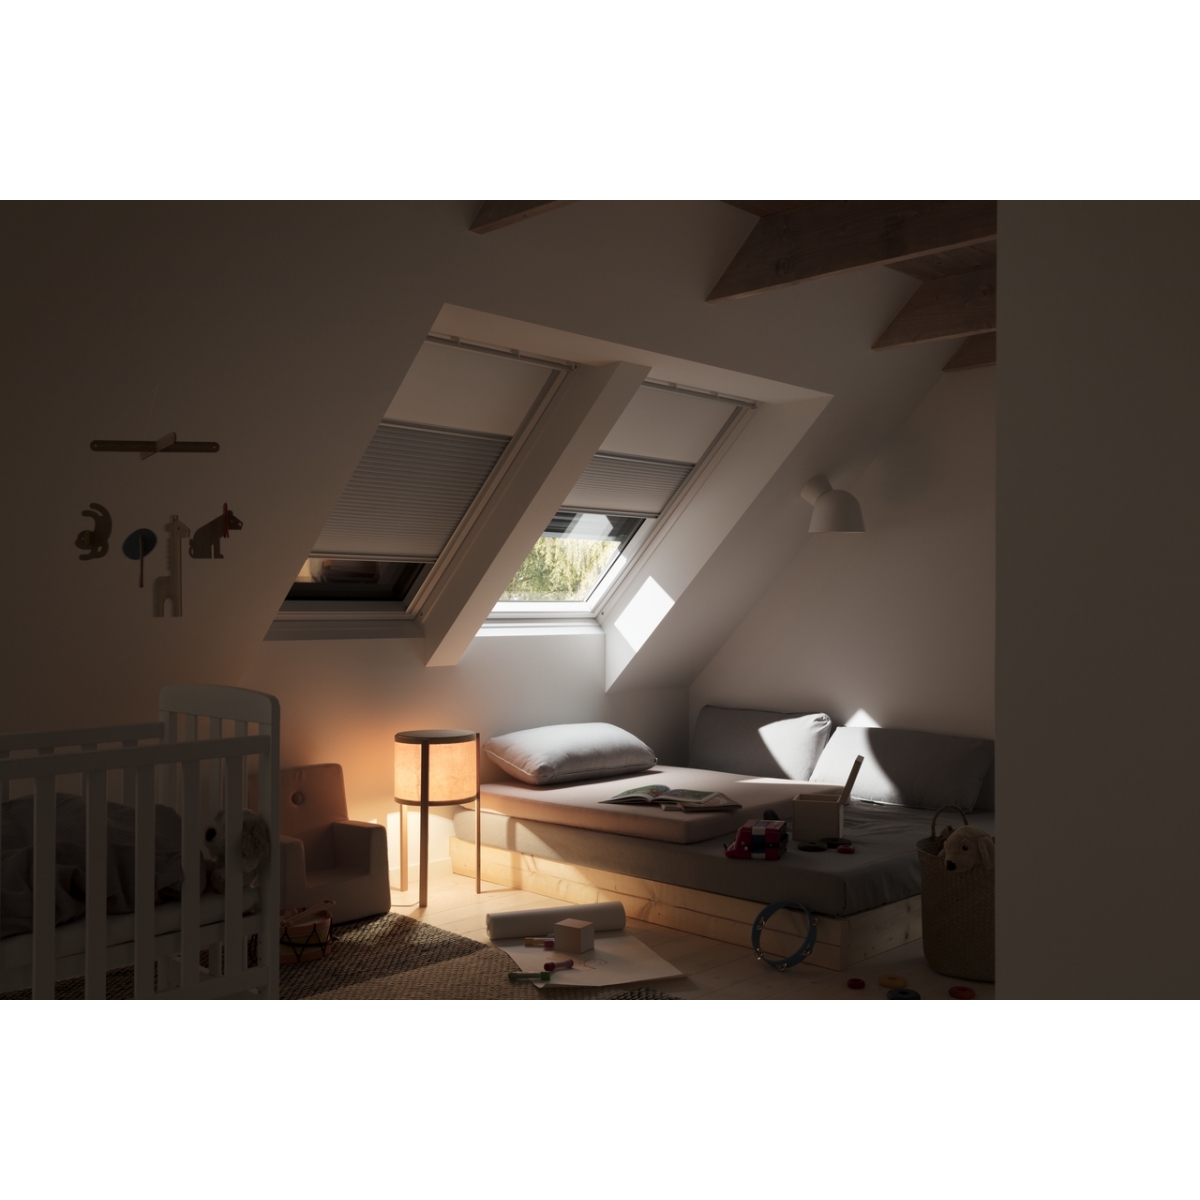 Manual DUO Blind DFD Navy Blue 1100 Standard DUO Blackout Blind VELUX